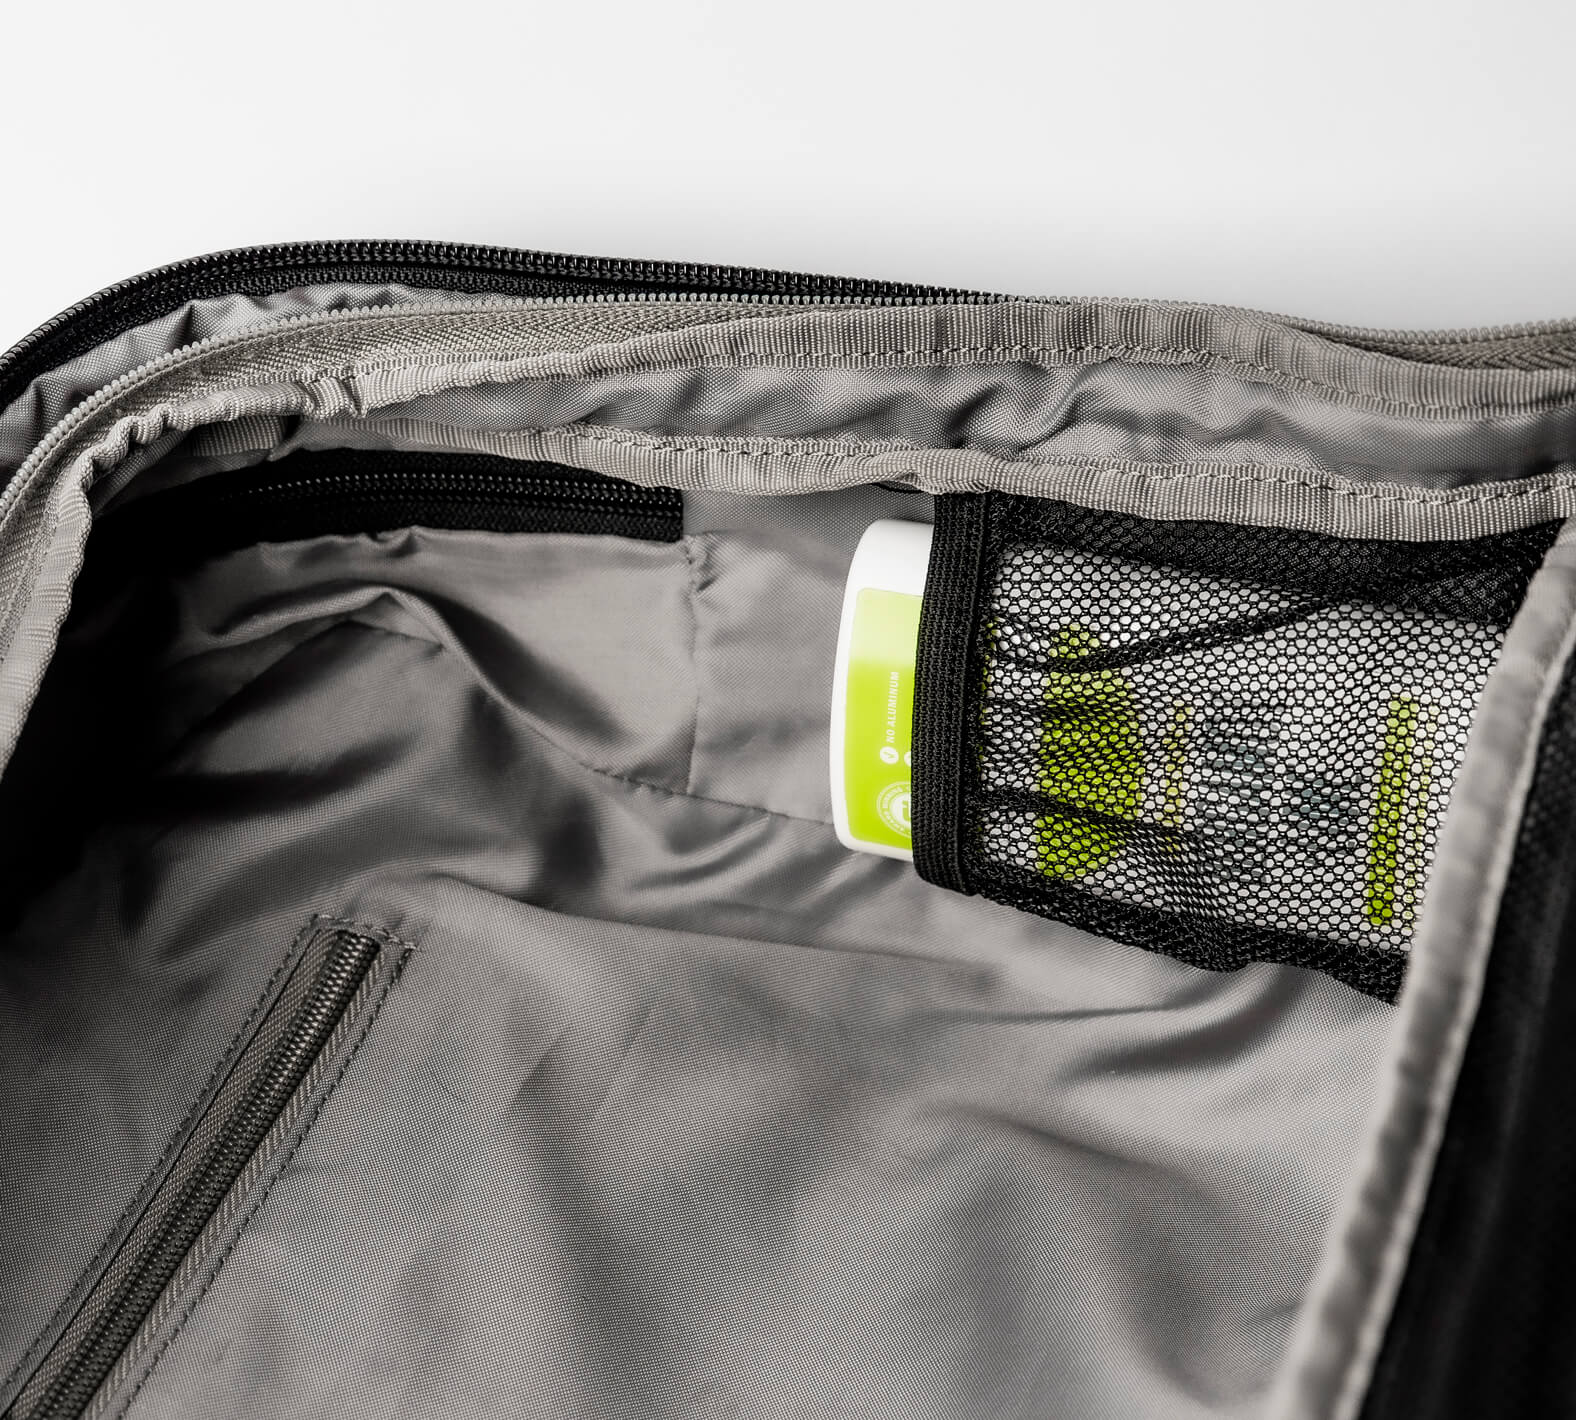 Interior mesh pockets are the perfect place to store small personal items like deodorant.